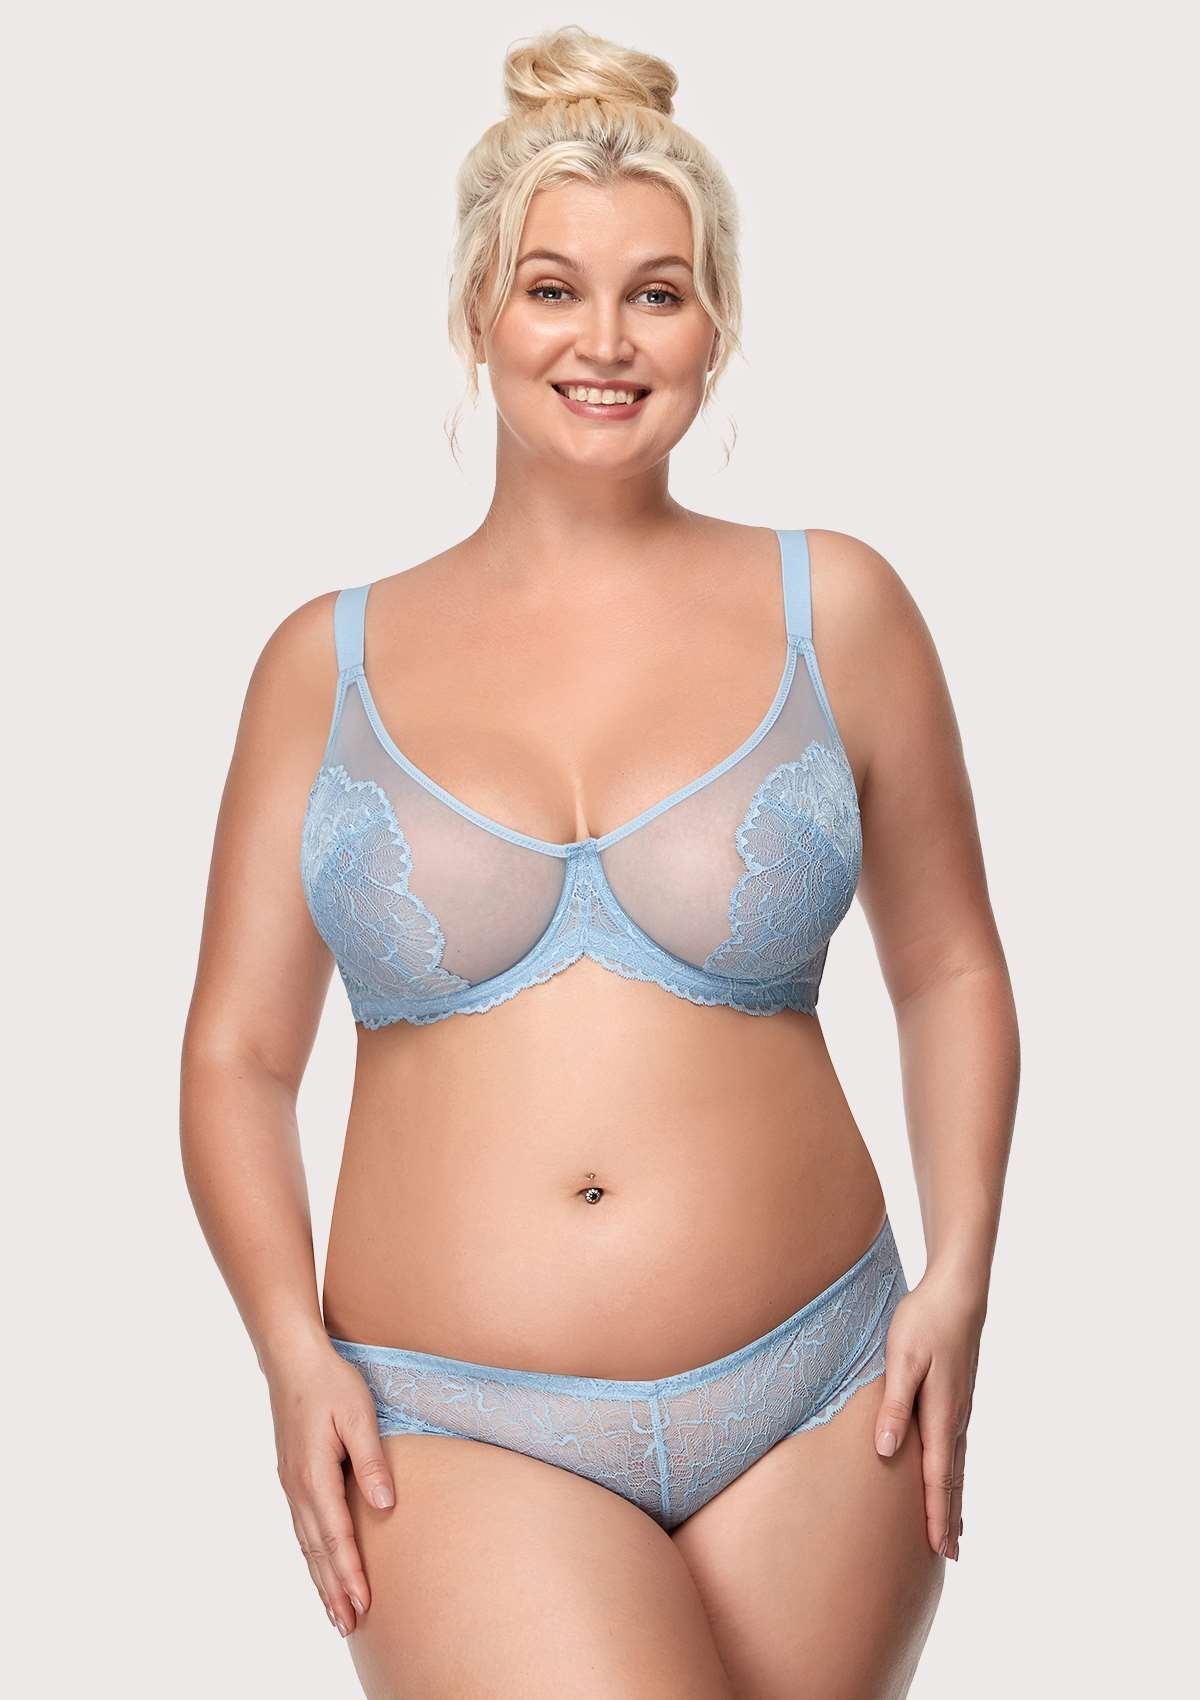 HSIA Blossom Full Coverage Supportive Unlined Underwire Bra Set - Storm Blue / 40 / C